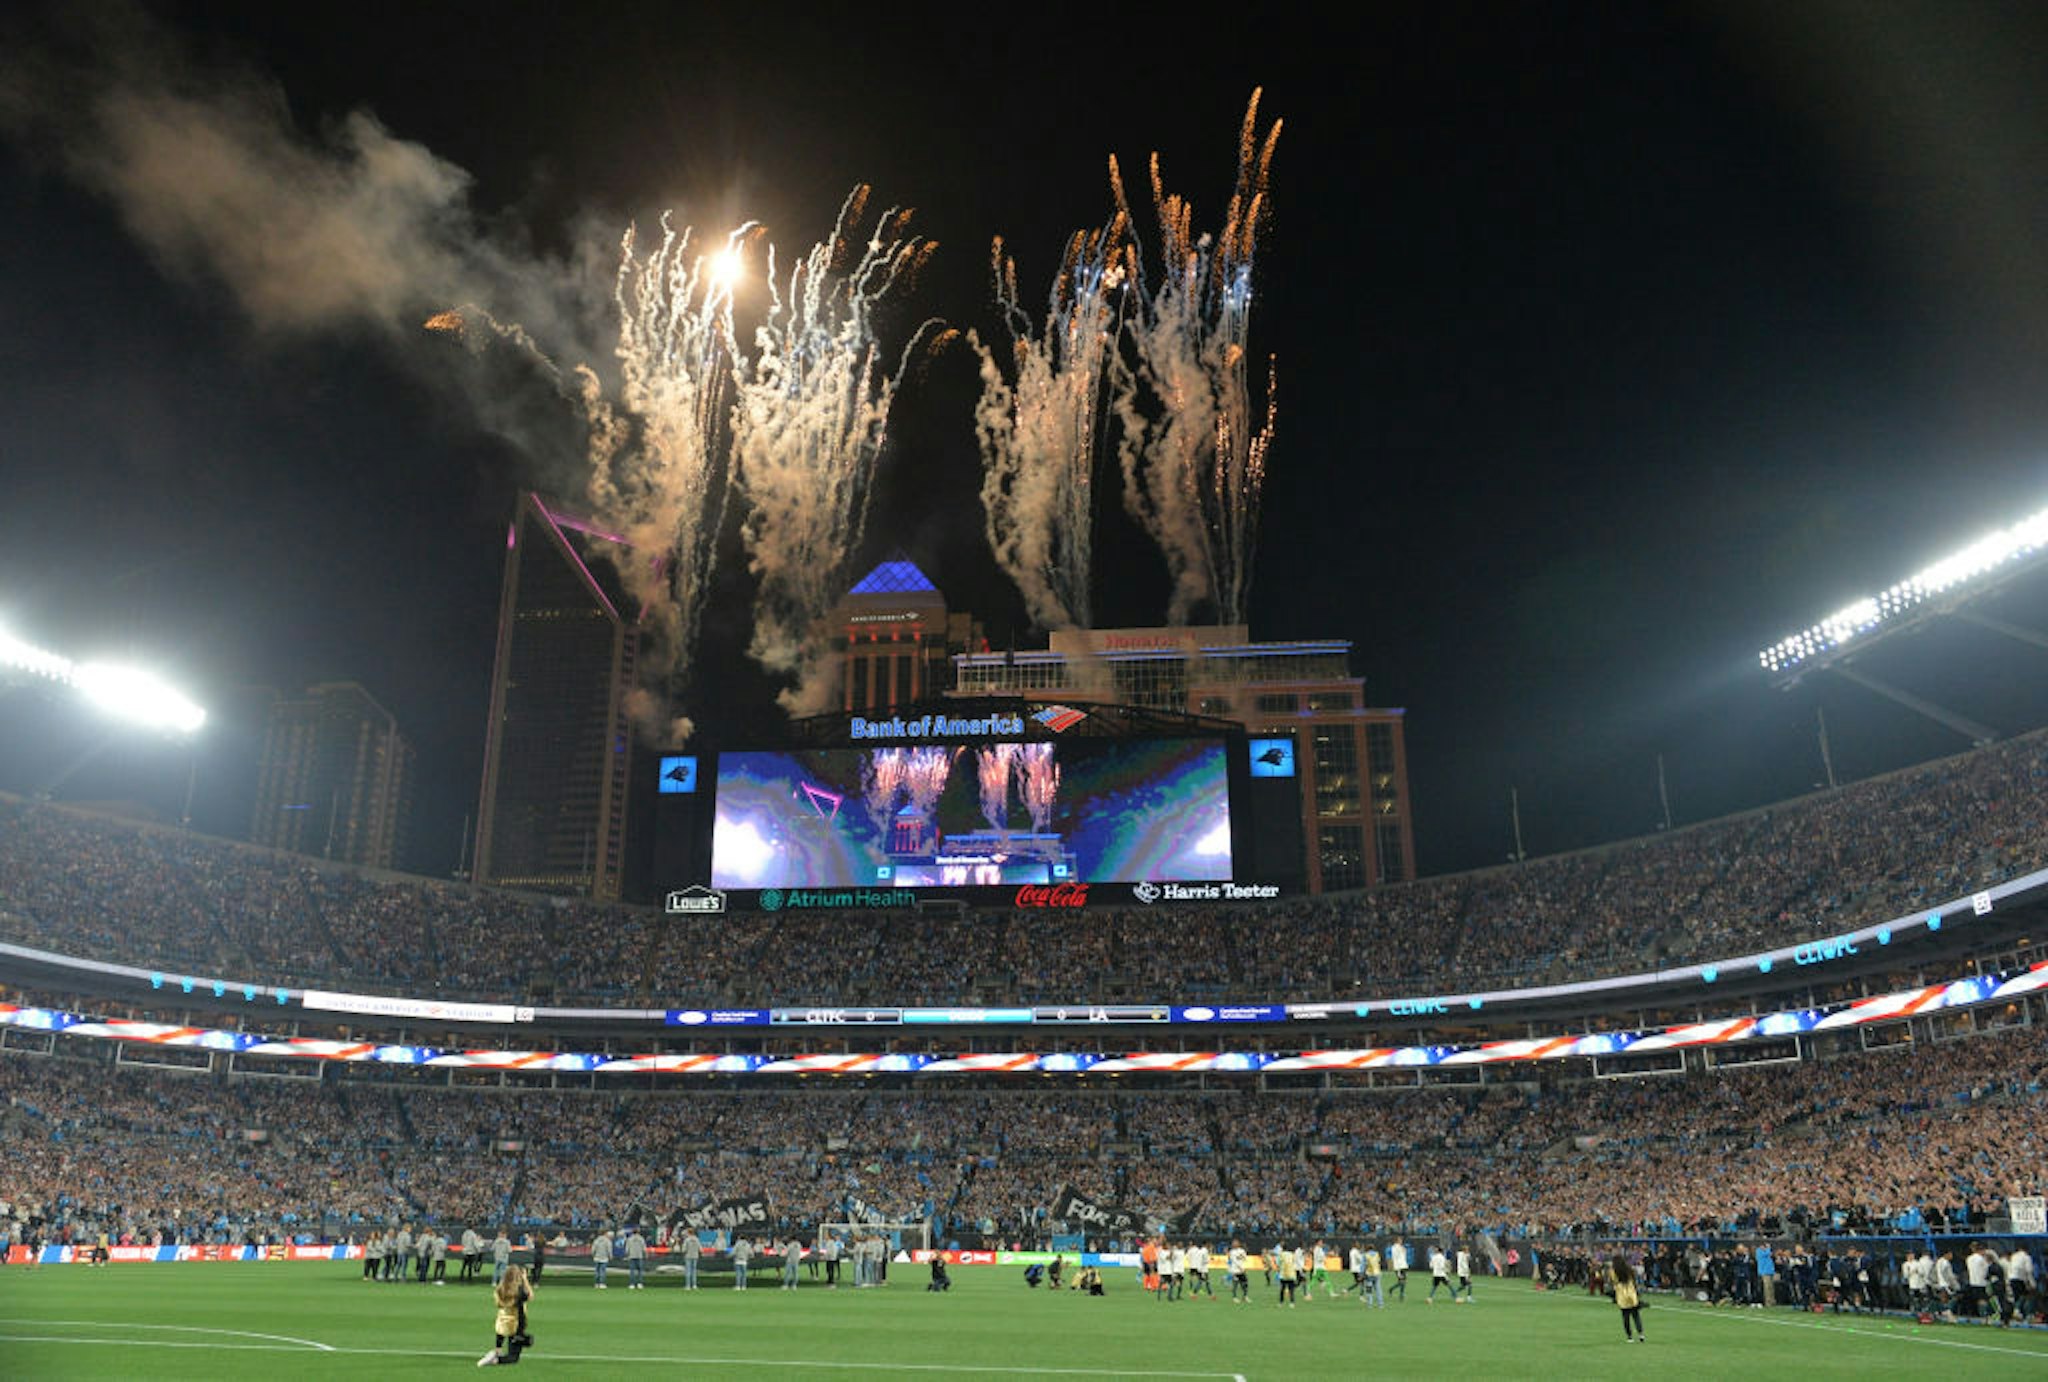 CHARLOTTE, USA - MARCH 5: Charlotte Football Club holds its inaugural match with record breaking attendance of over 74 thousand fans at the Bank of America Stadium with fireworks against the LA Galaxy as the match ended 1:0 for LA Galaxy in Charlotte, NC, United States on March 5, 2022 (Photo by Peter Zay/Anadolu Agency via Getty Images)